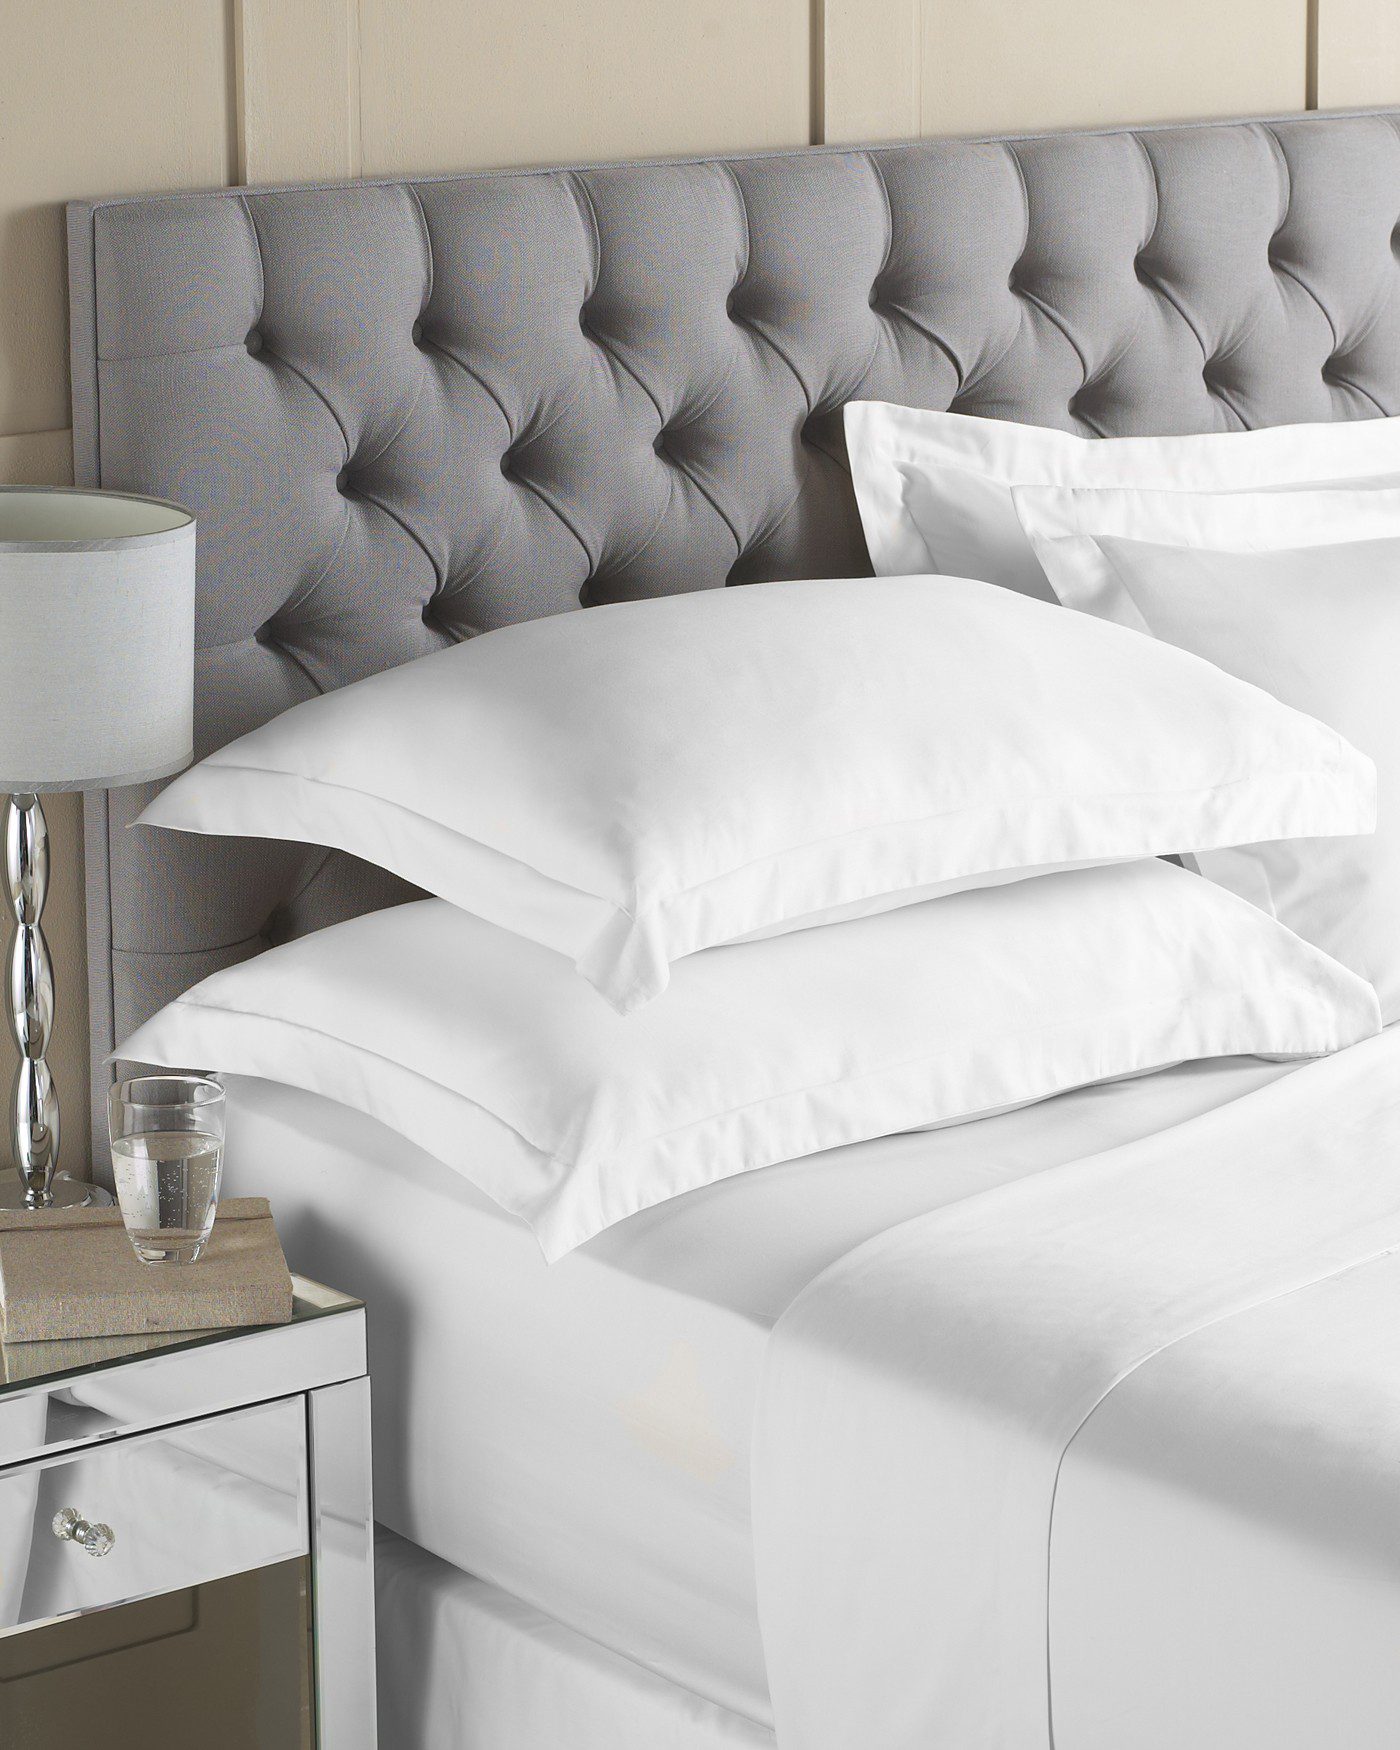 400 Thread Count White Cotton Pillowcases/Sheets